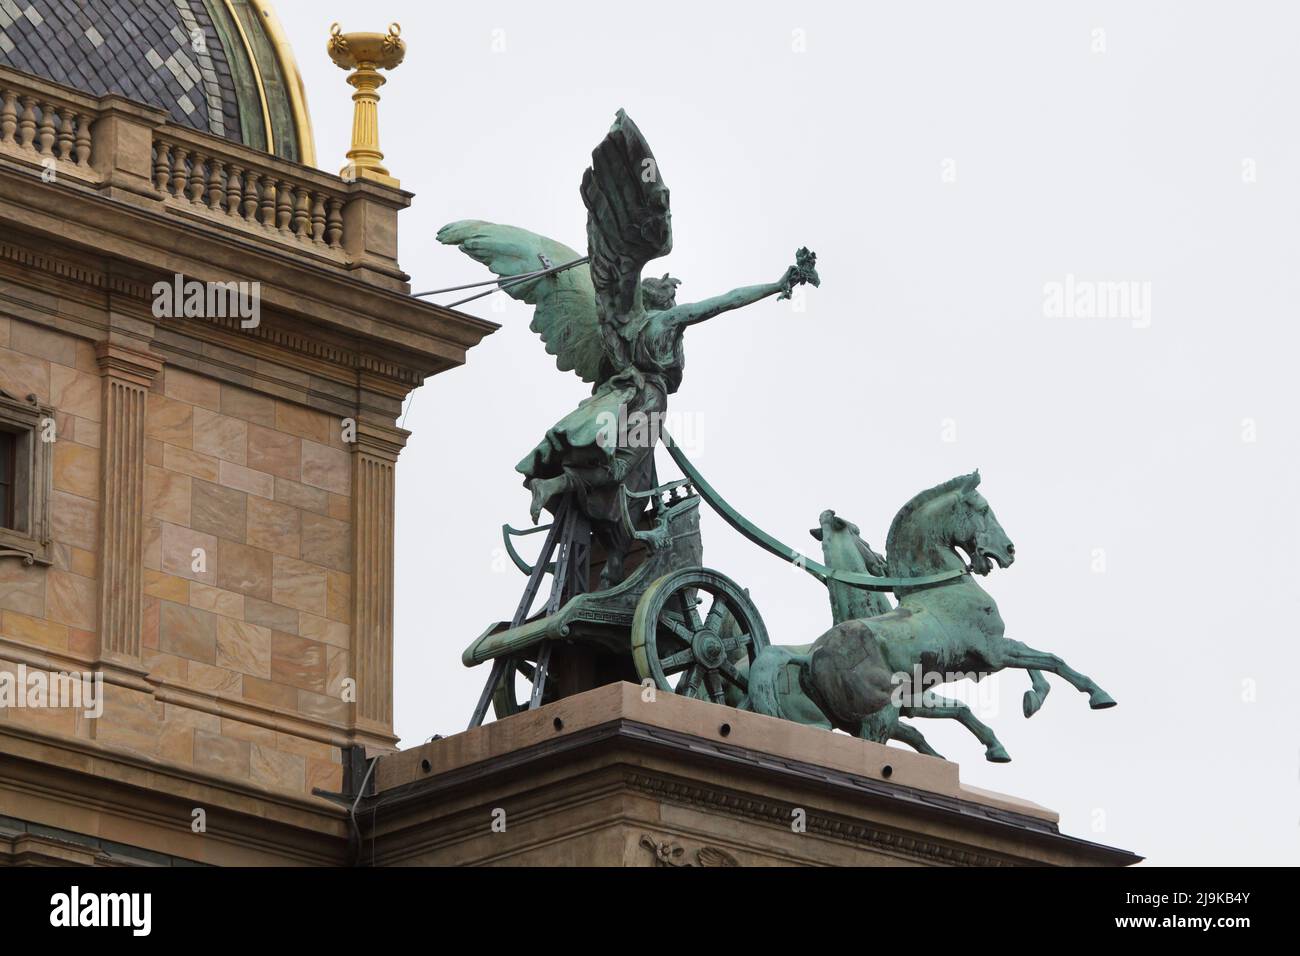 Triga (three-horse chariot) on the roof terrace of the National Theatre (Národní divadlo) in Prague, Czech Republic. The bronze sculptural group designed by Czech sculptor Ladislav Šaloun after a scale model by Czech sculptor Bohuslav Schnirch was completed in 1911. Stock Photo